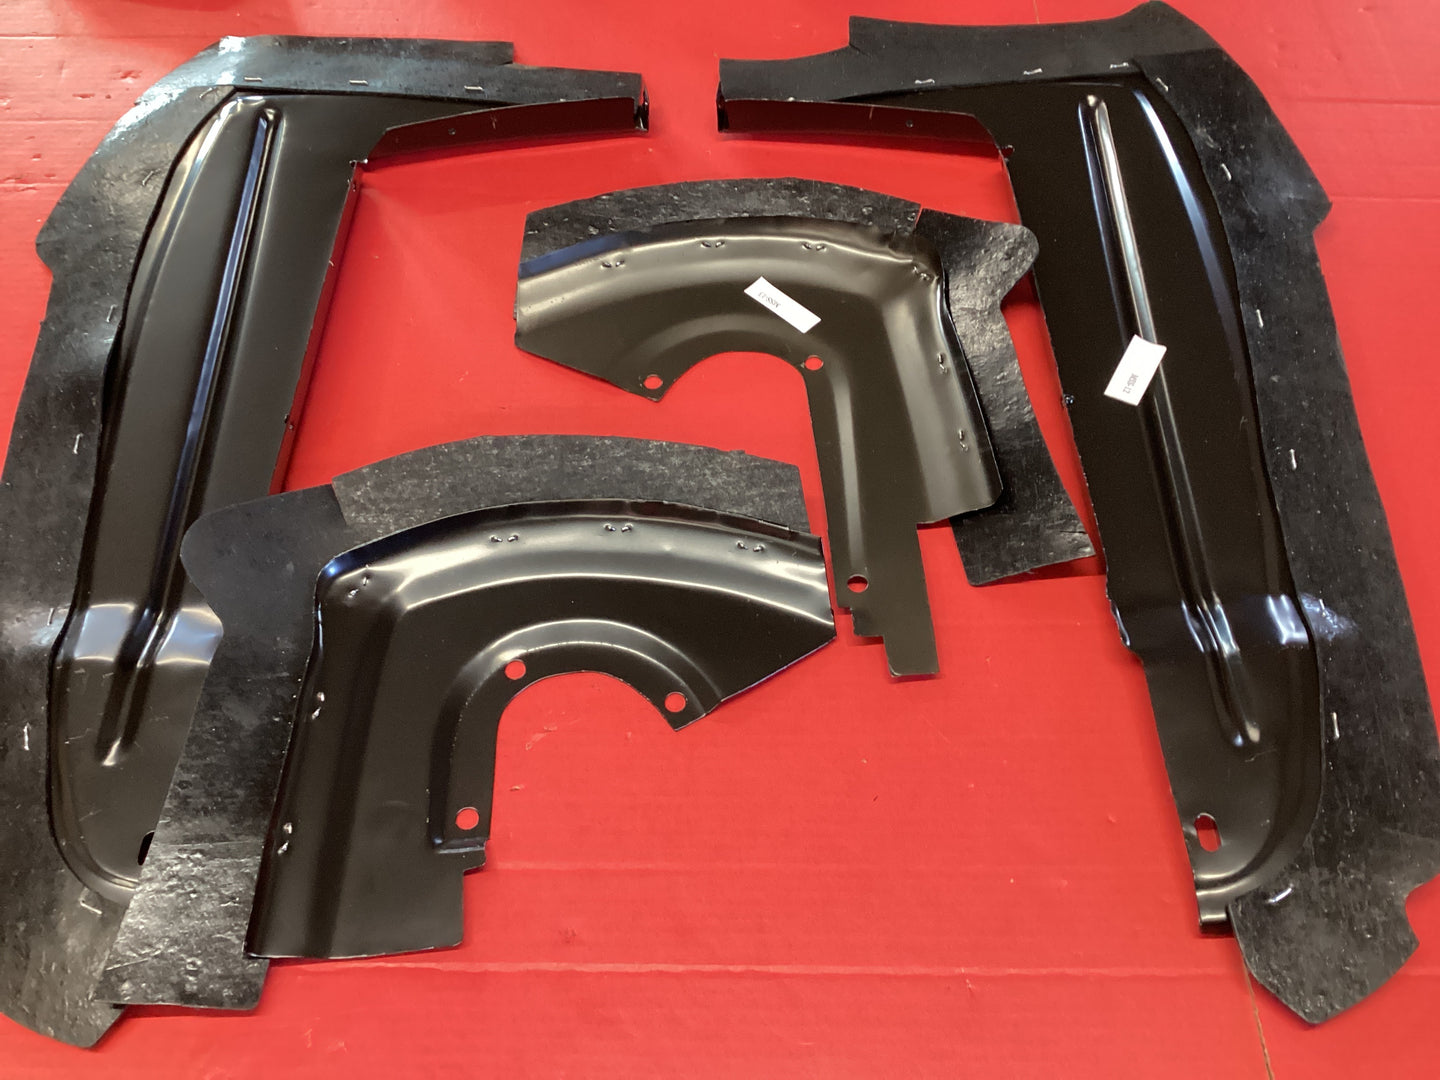 Mustang 1965-1966 Front Fender Spash Shield Set 0f 4   (2 for front inner fender and 2 rear inner front fender) with rubber attached